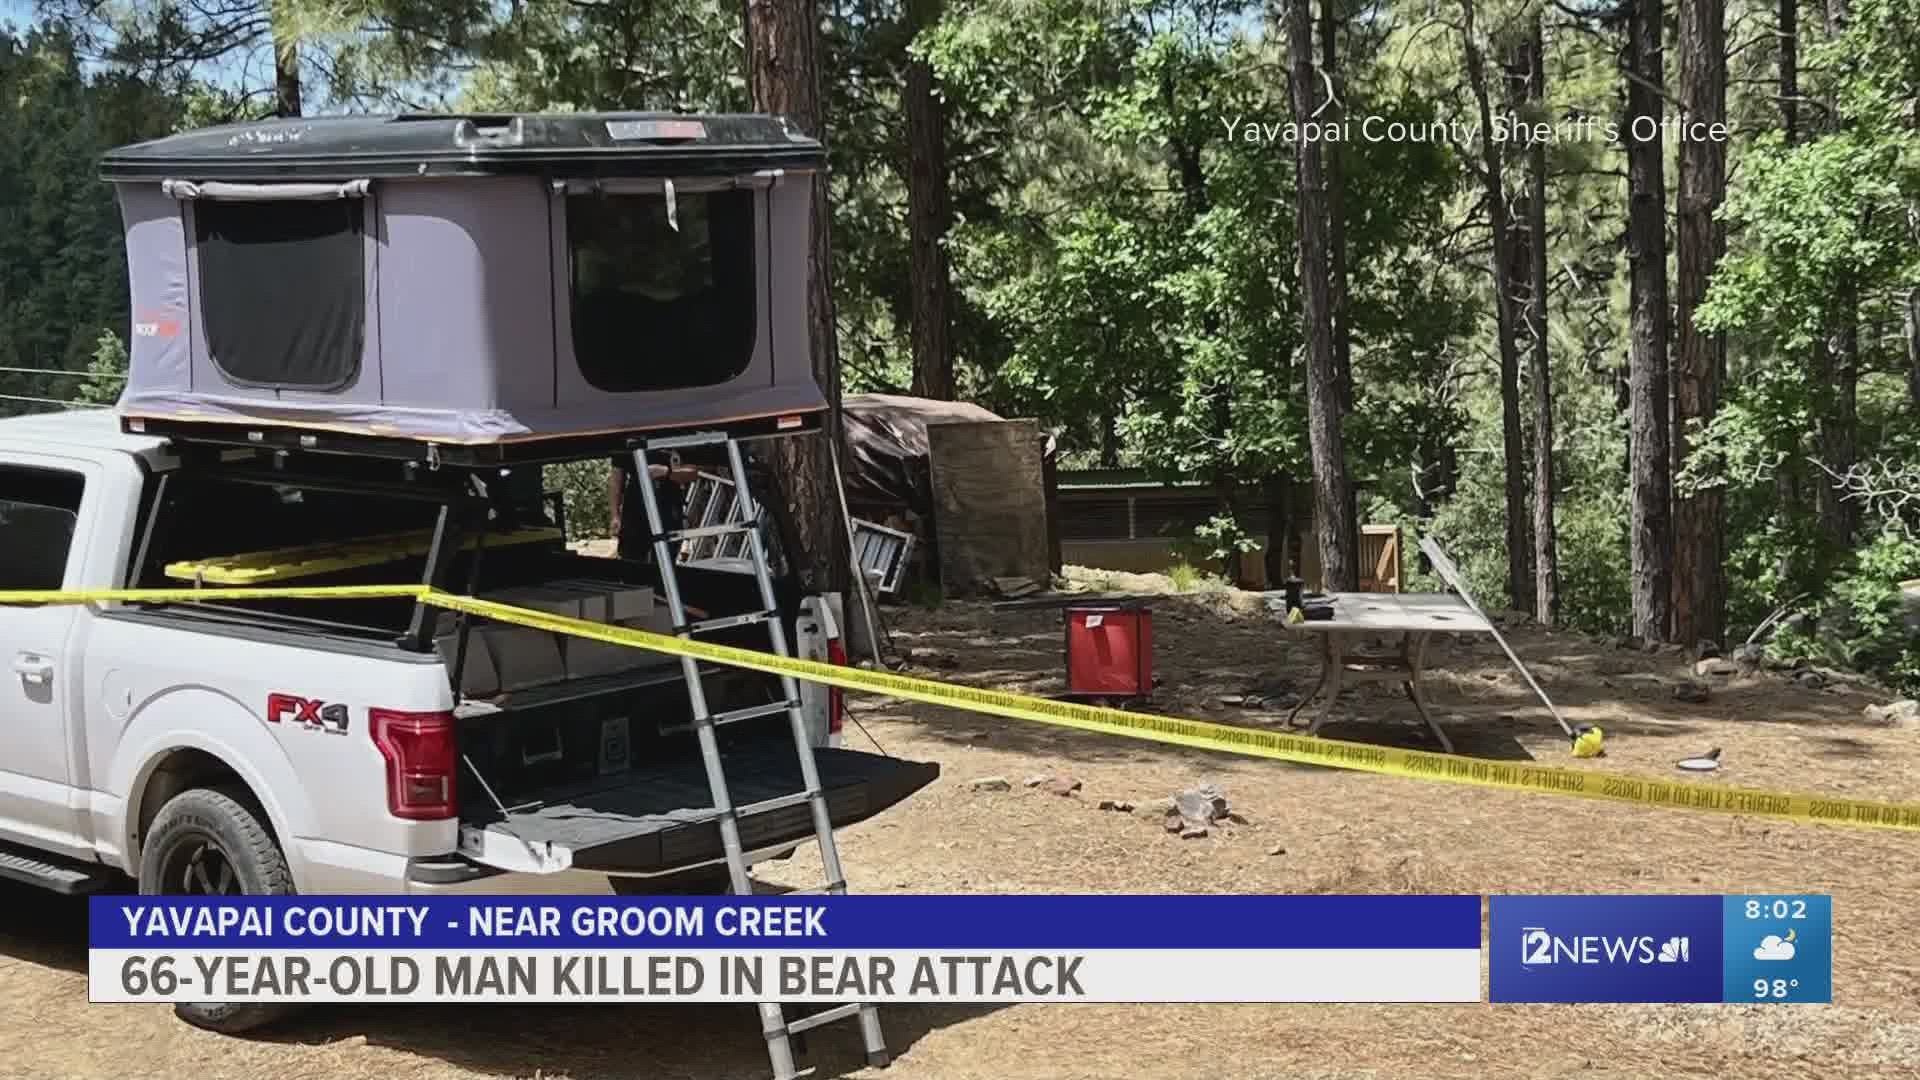 The Yavapai County Sheriff’s Office said the attack happened Friday morning in the area of Groom Creek, roughly 100 miles north of Phoenix.